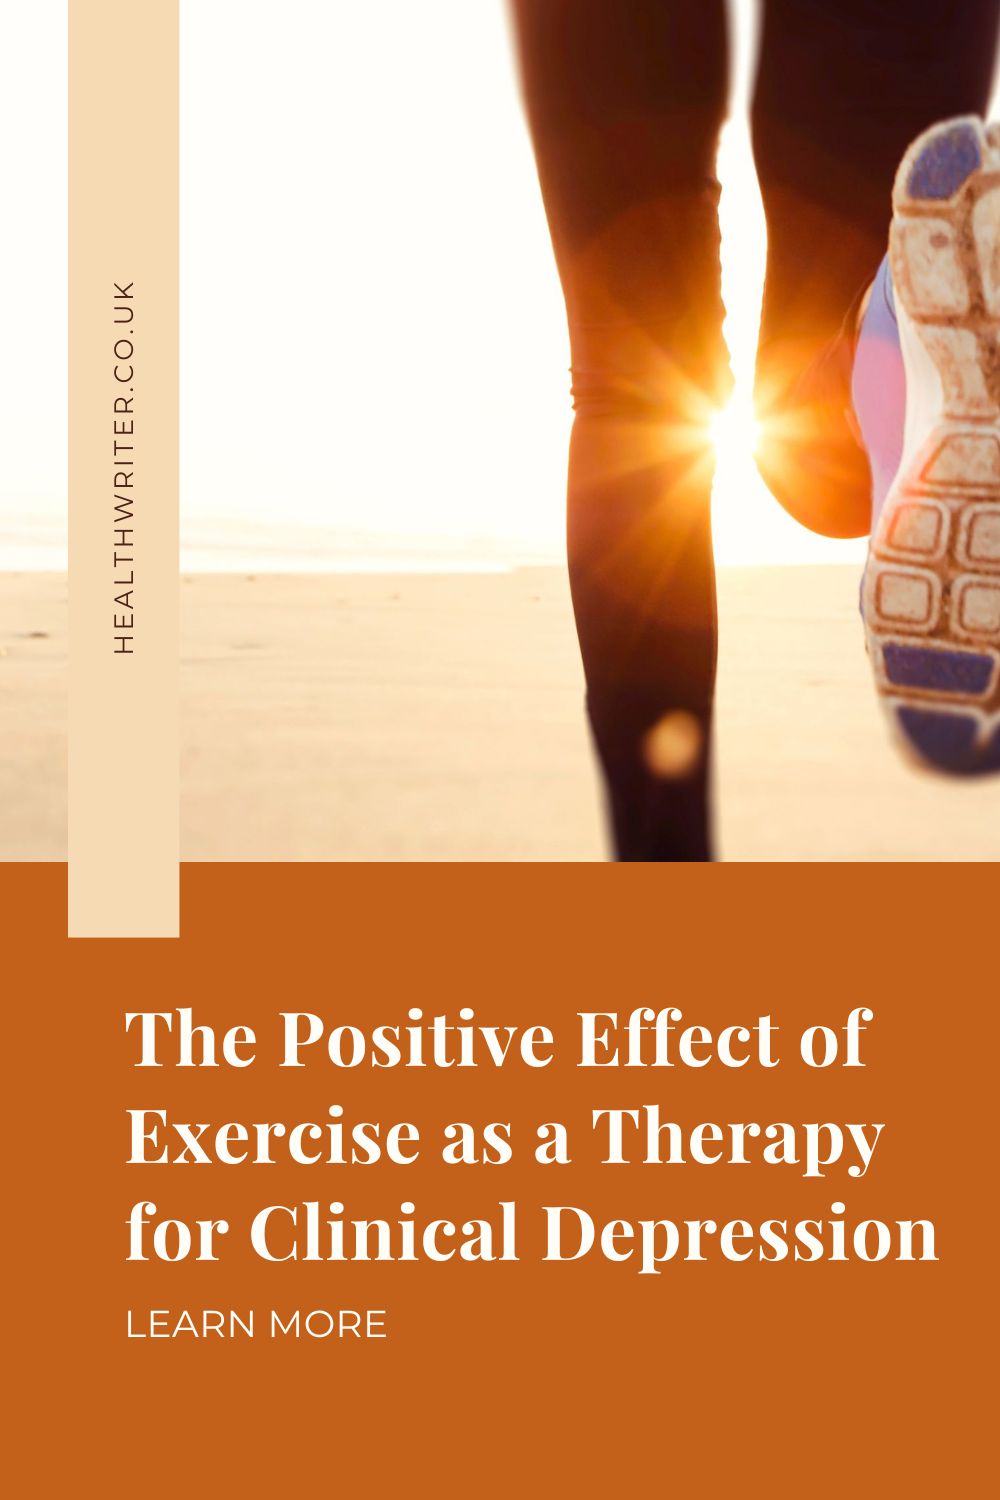 The positive effect of exercise a therapy for clinical depression.